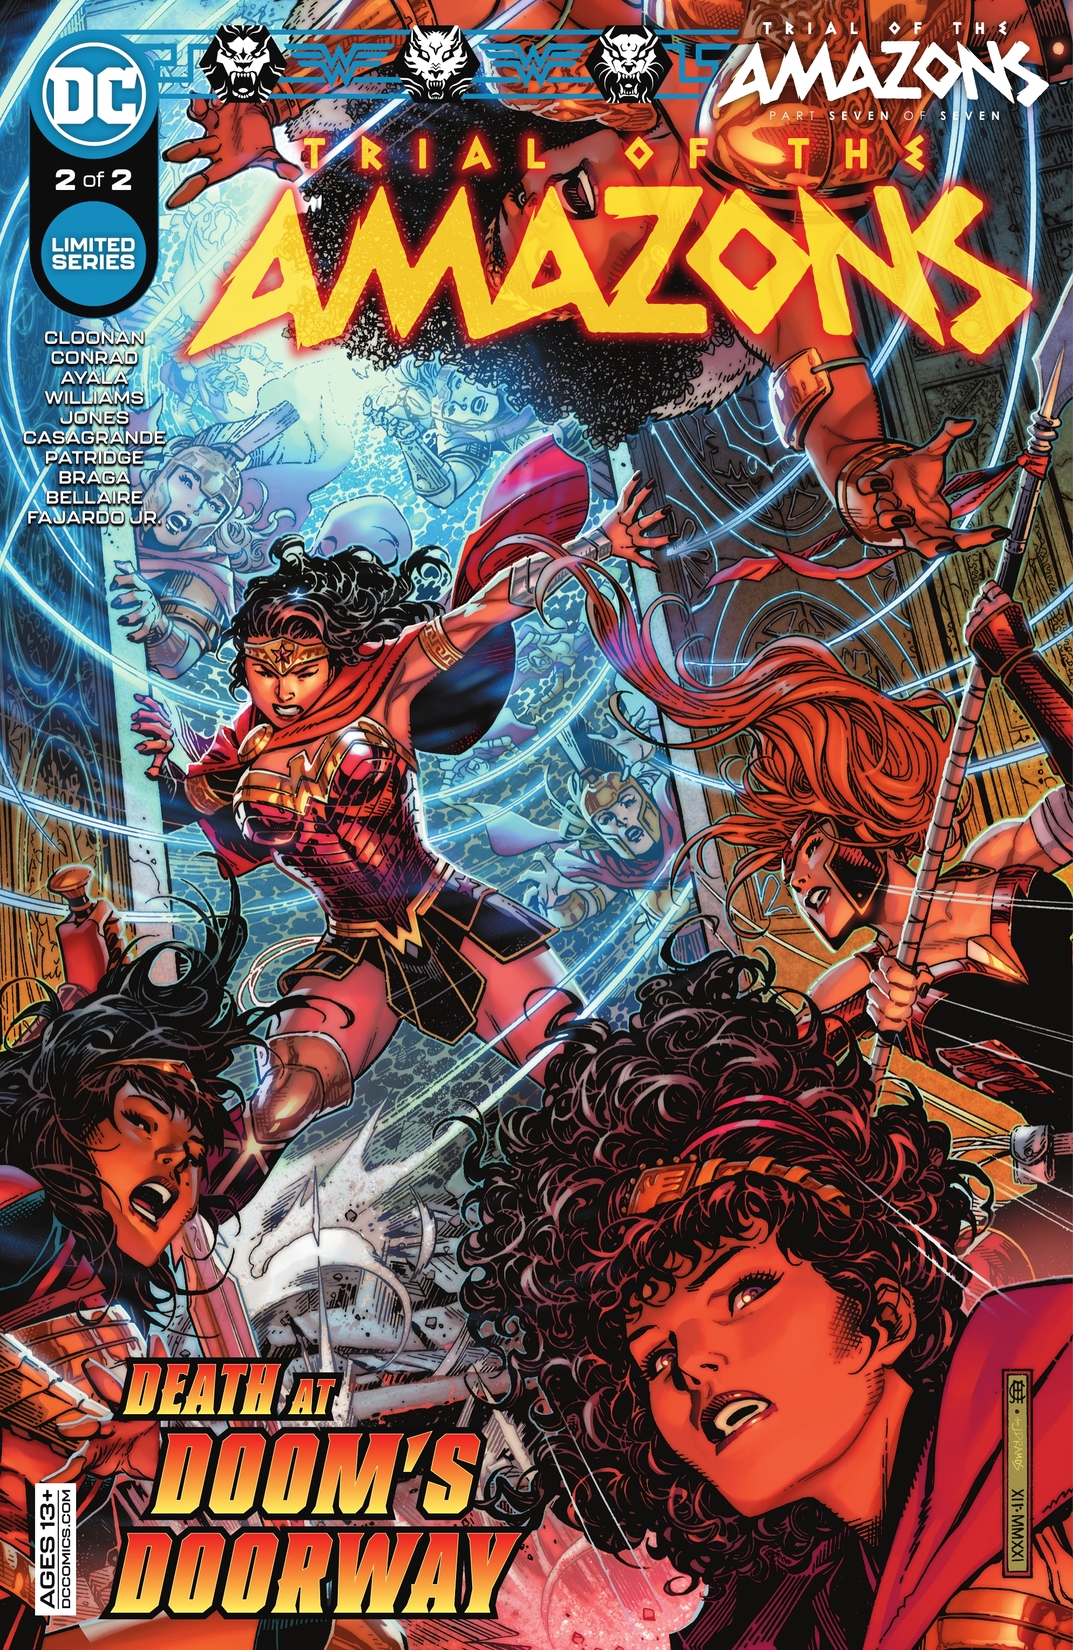 Trial of the Amazons (2022) #2 preview images